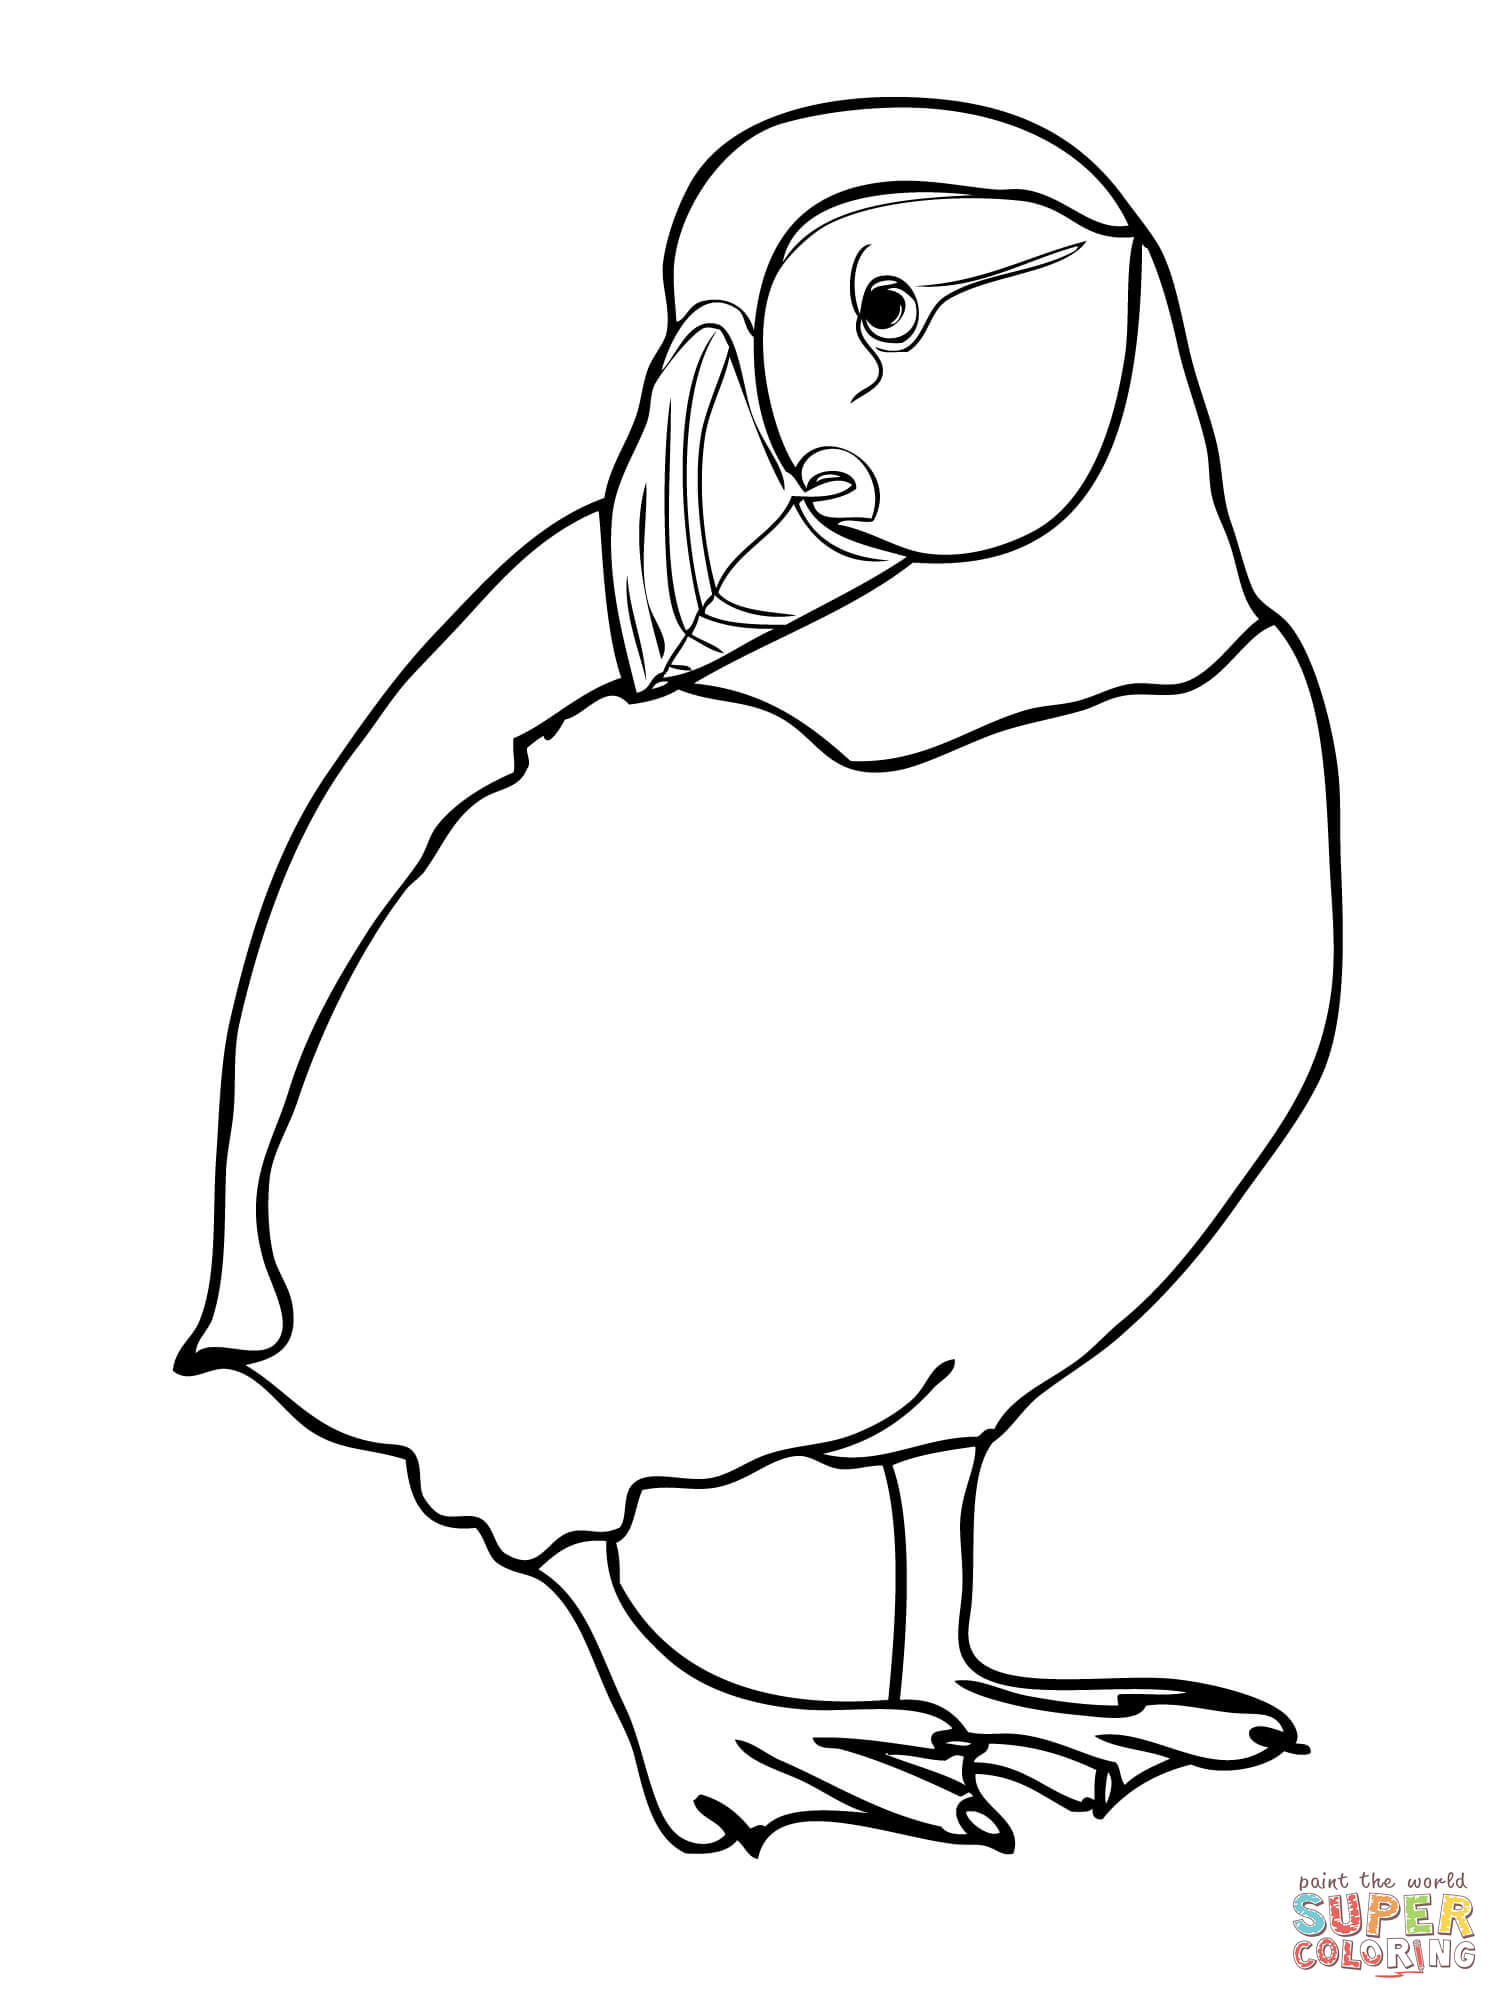 Puffin Coloring Page - Coloring Home